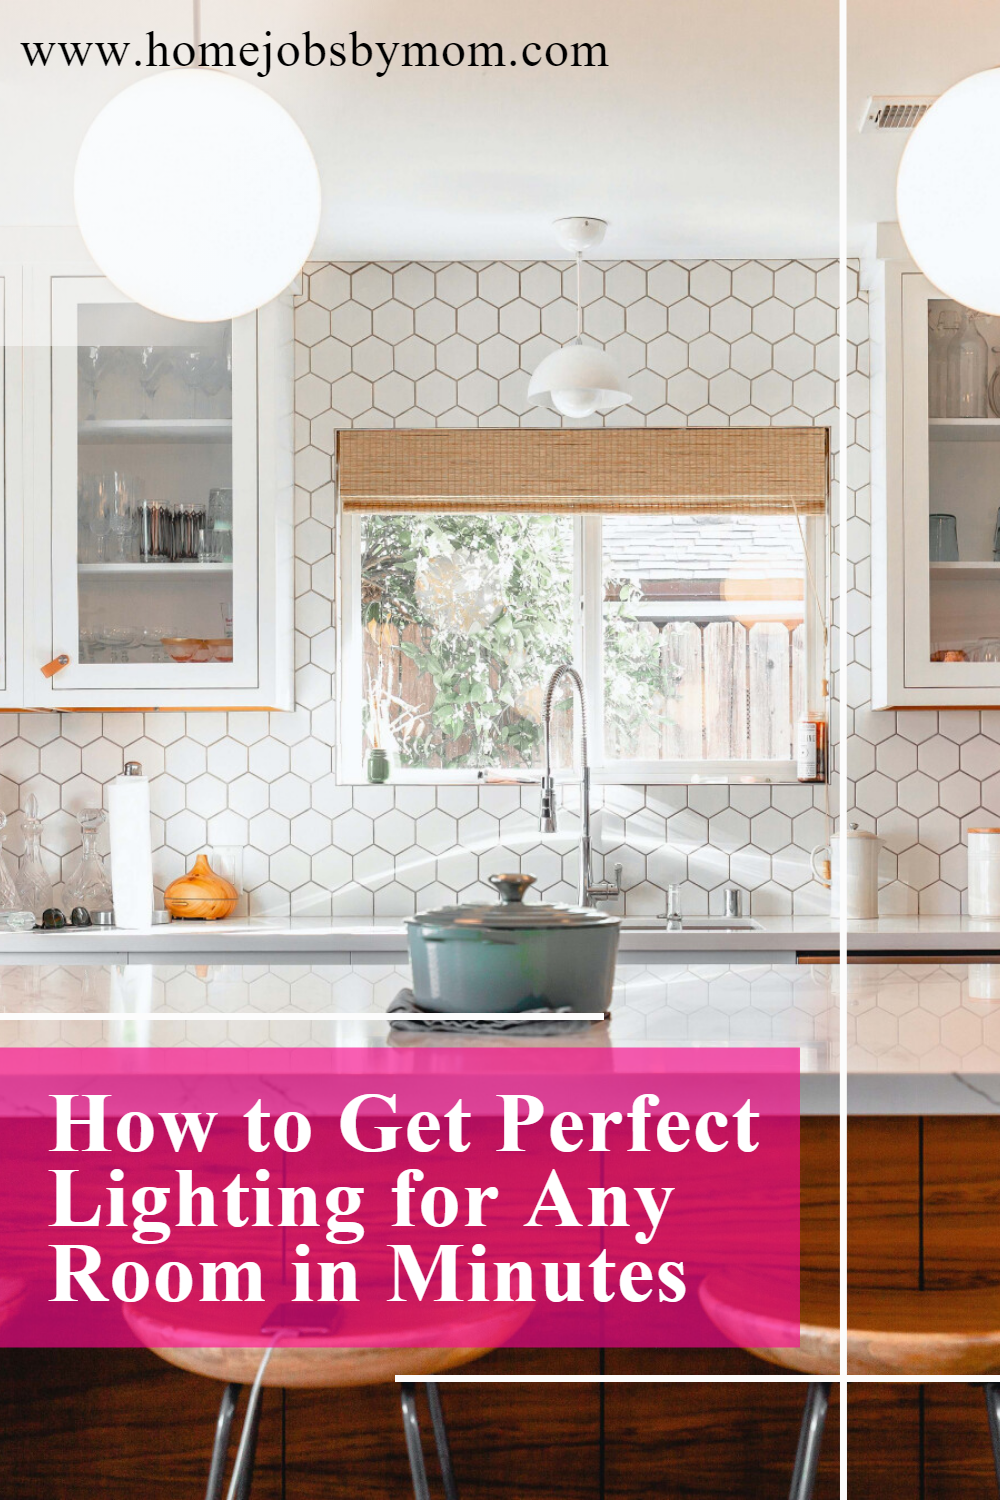 How to Get Perfect Lighting for Any Room in Minutes